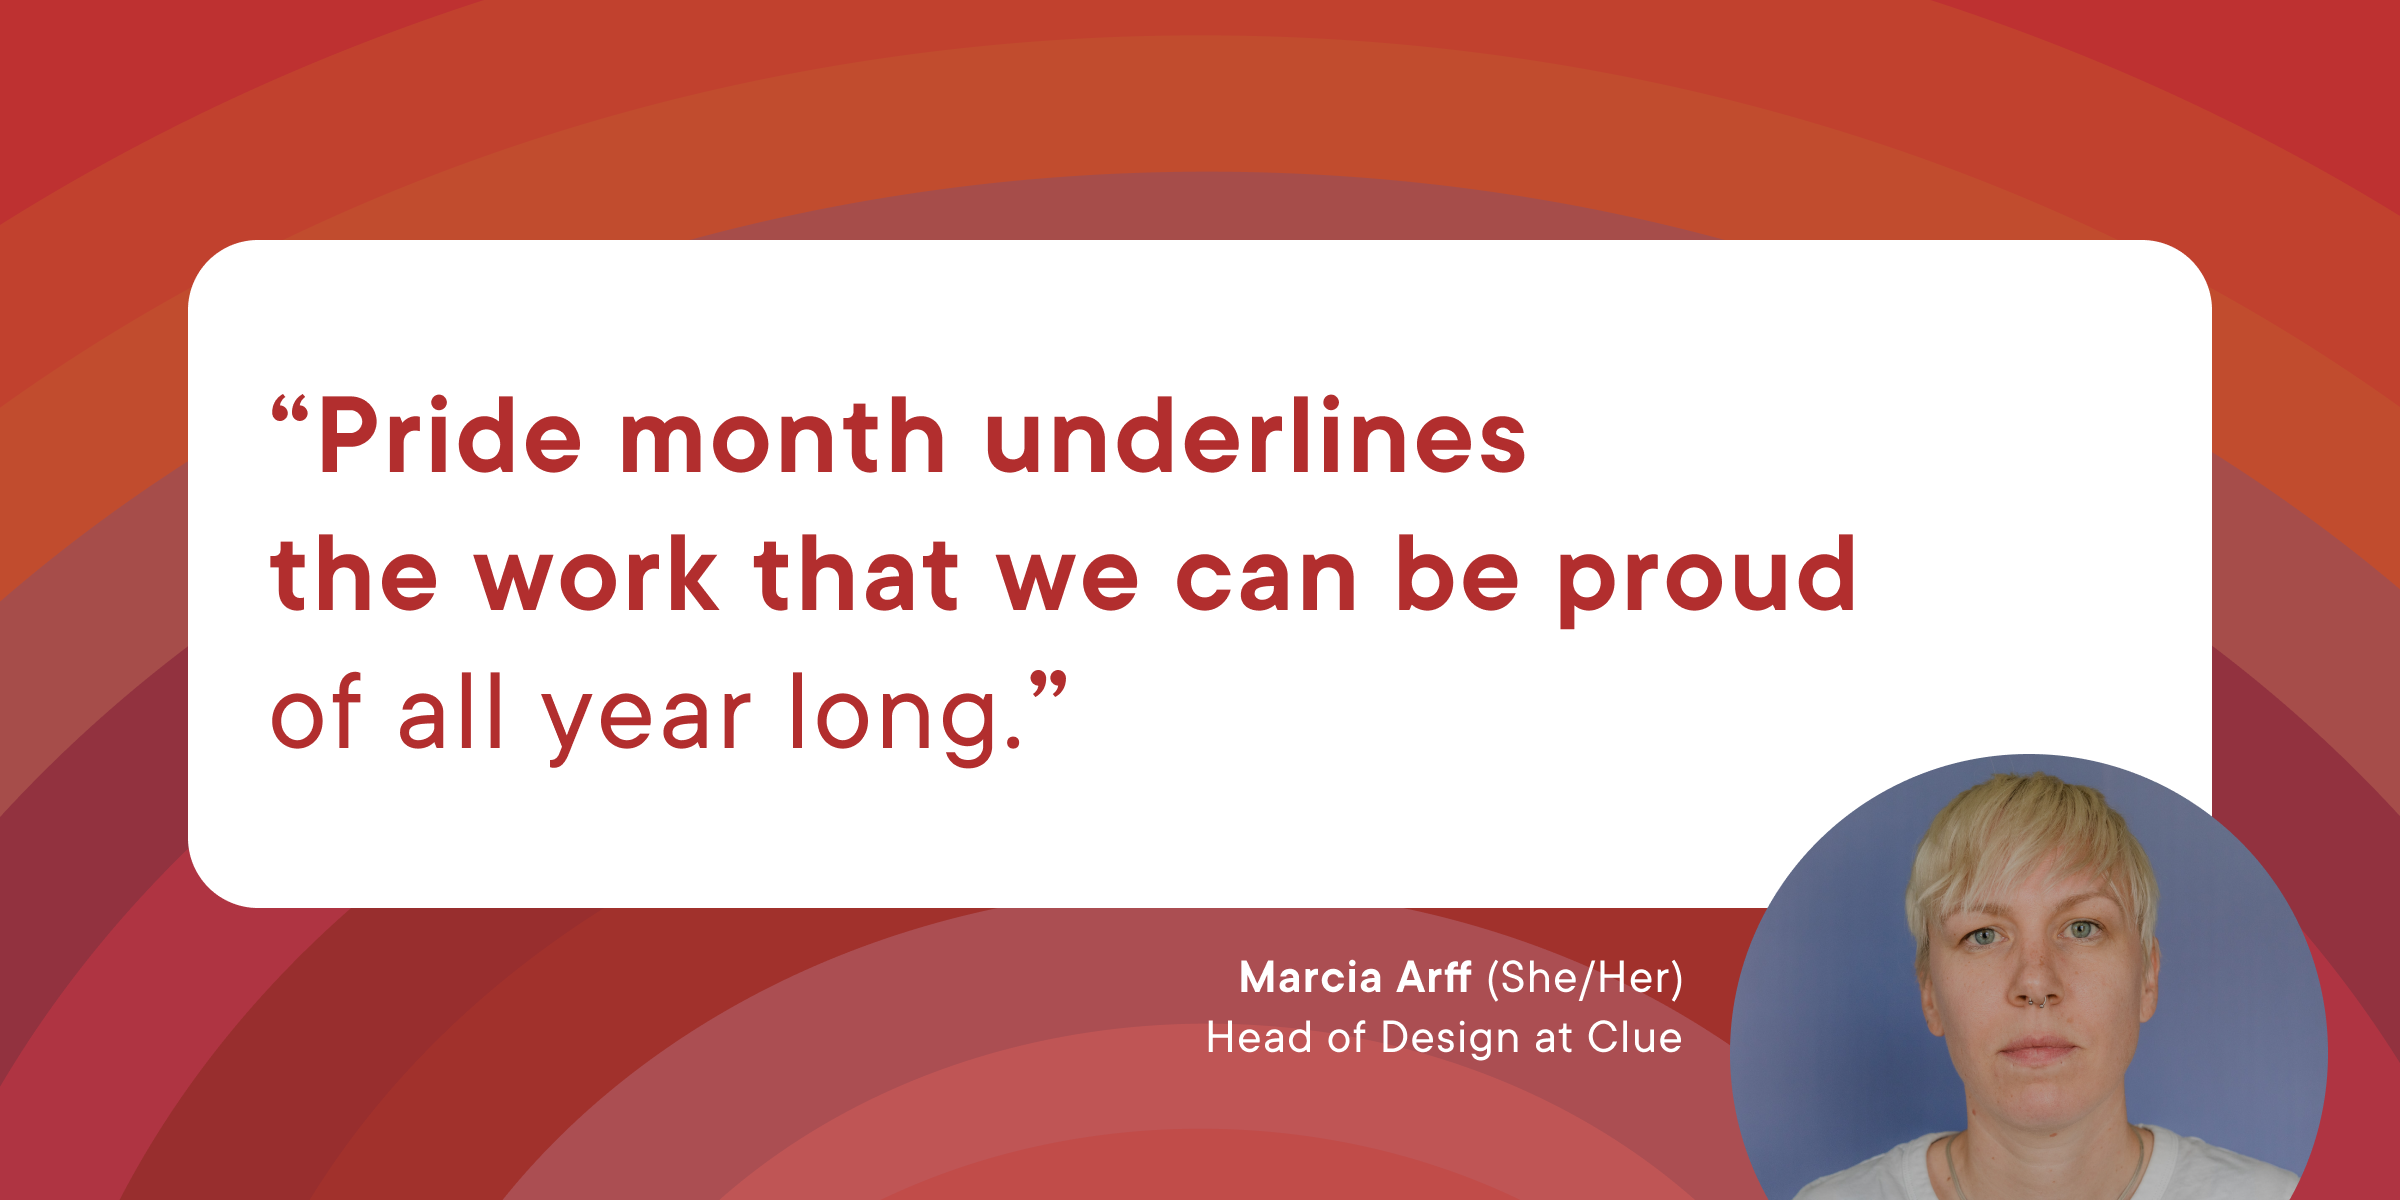 A short quote from Clue employee Marcia: "Pride month underlines the work that we can be proud of all year long."